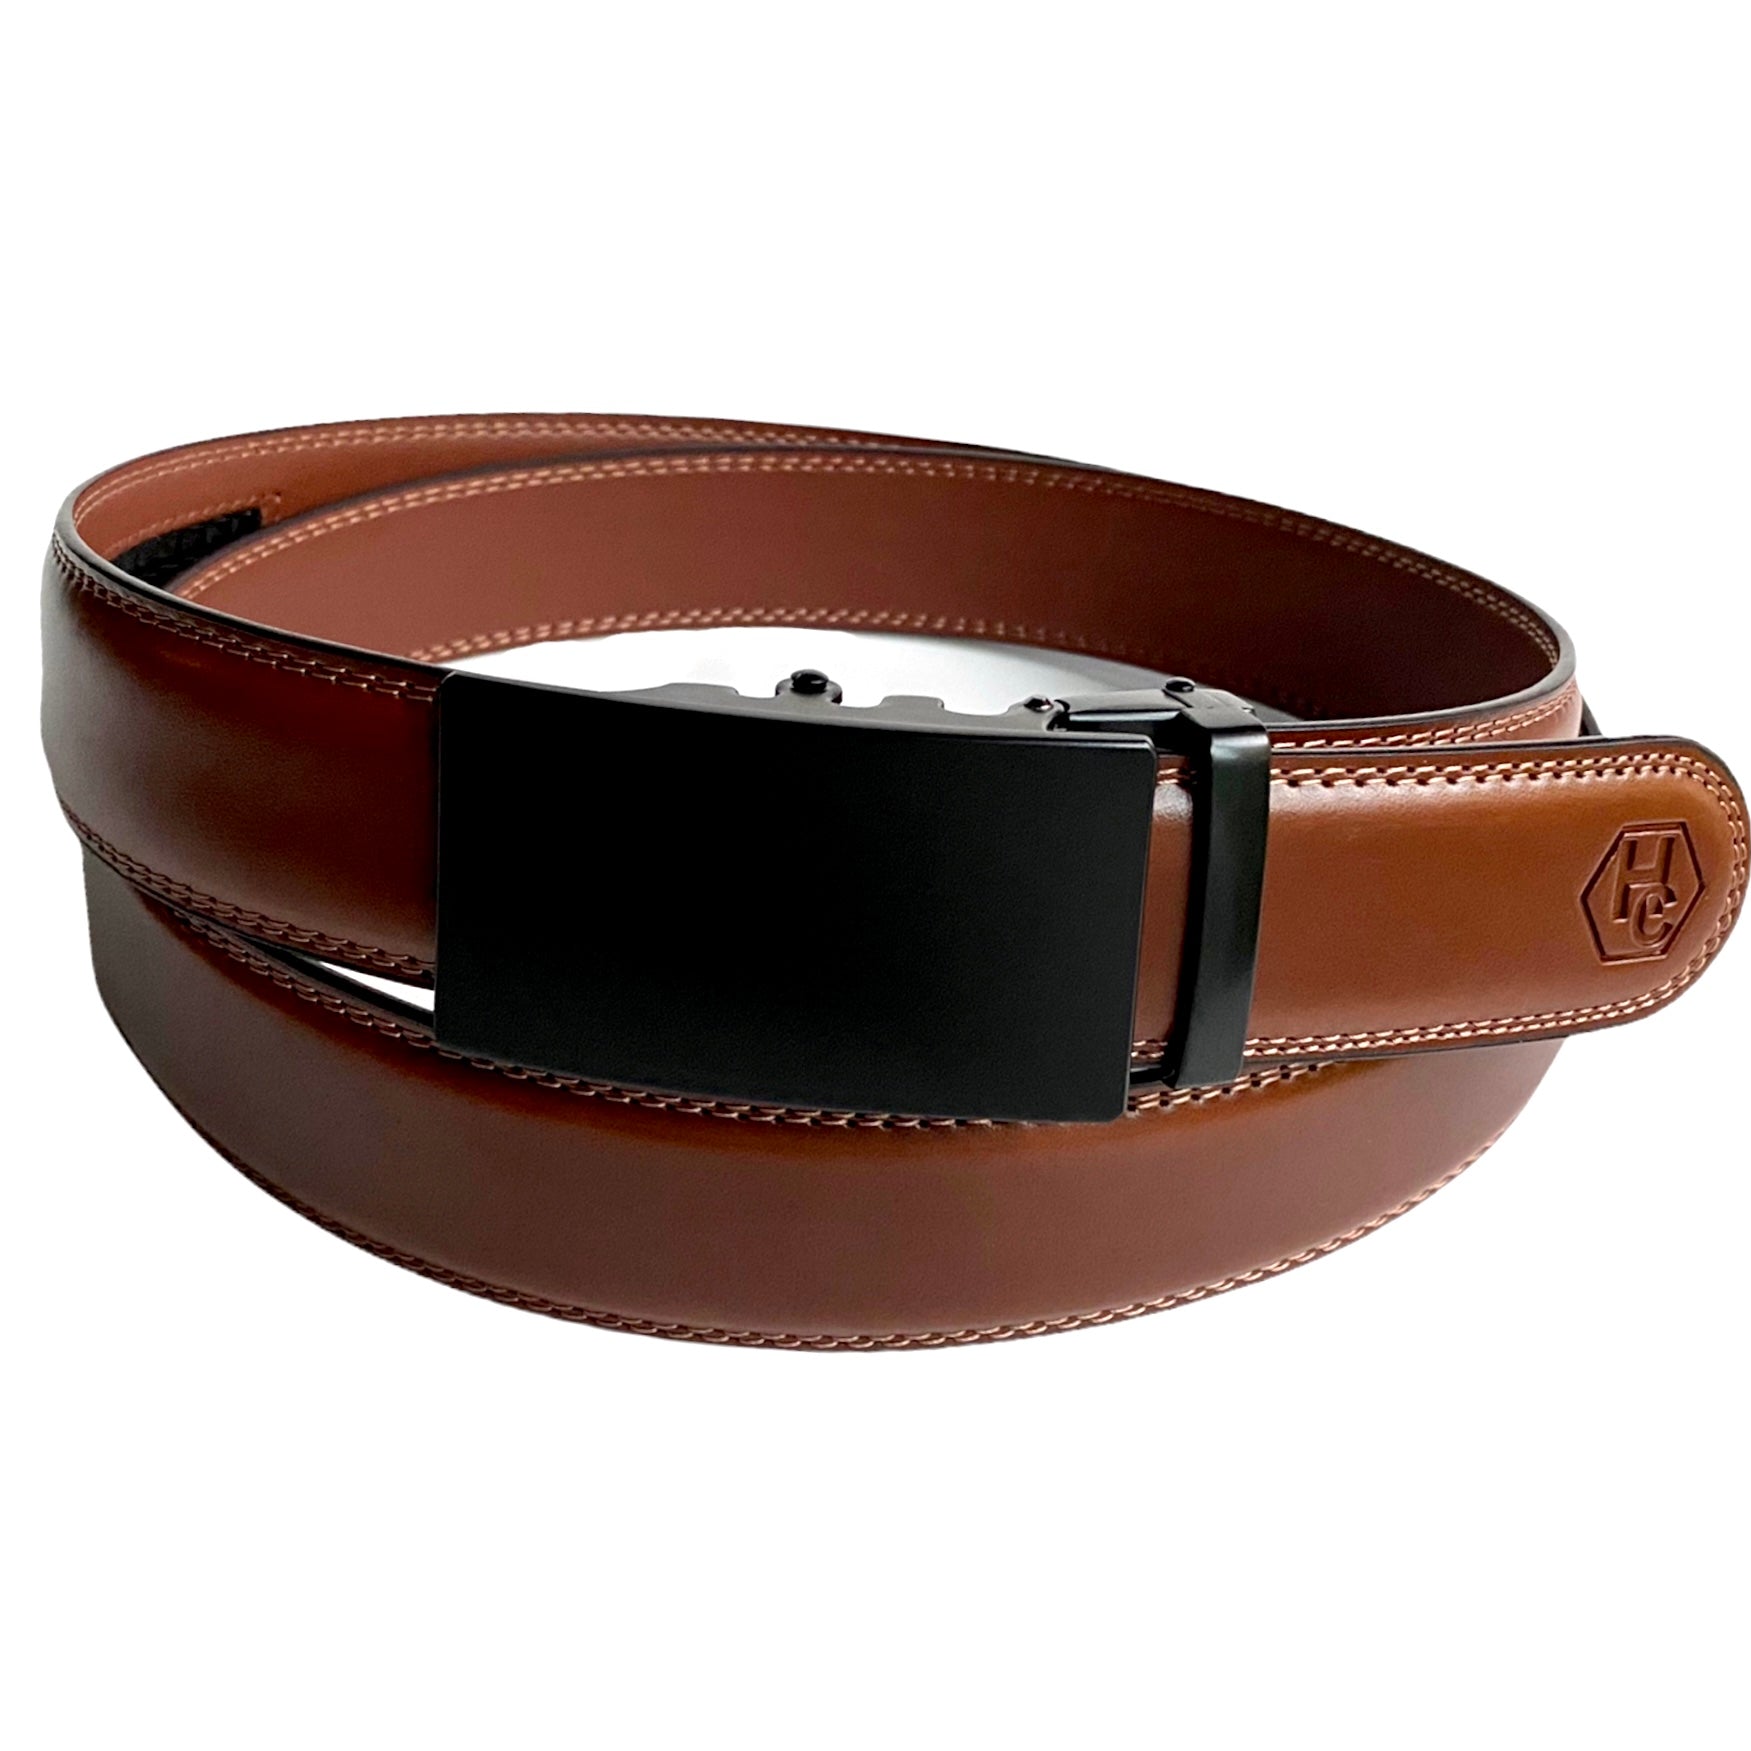 1.38" Genuine Leather Brown Strap And 1.38" Automatic Belt Buckle Black 24710805848215